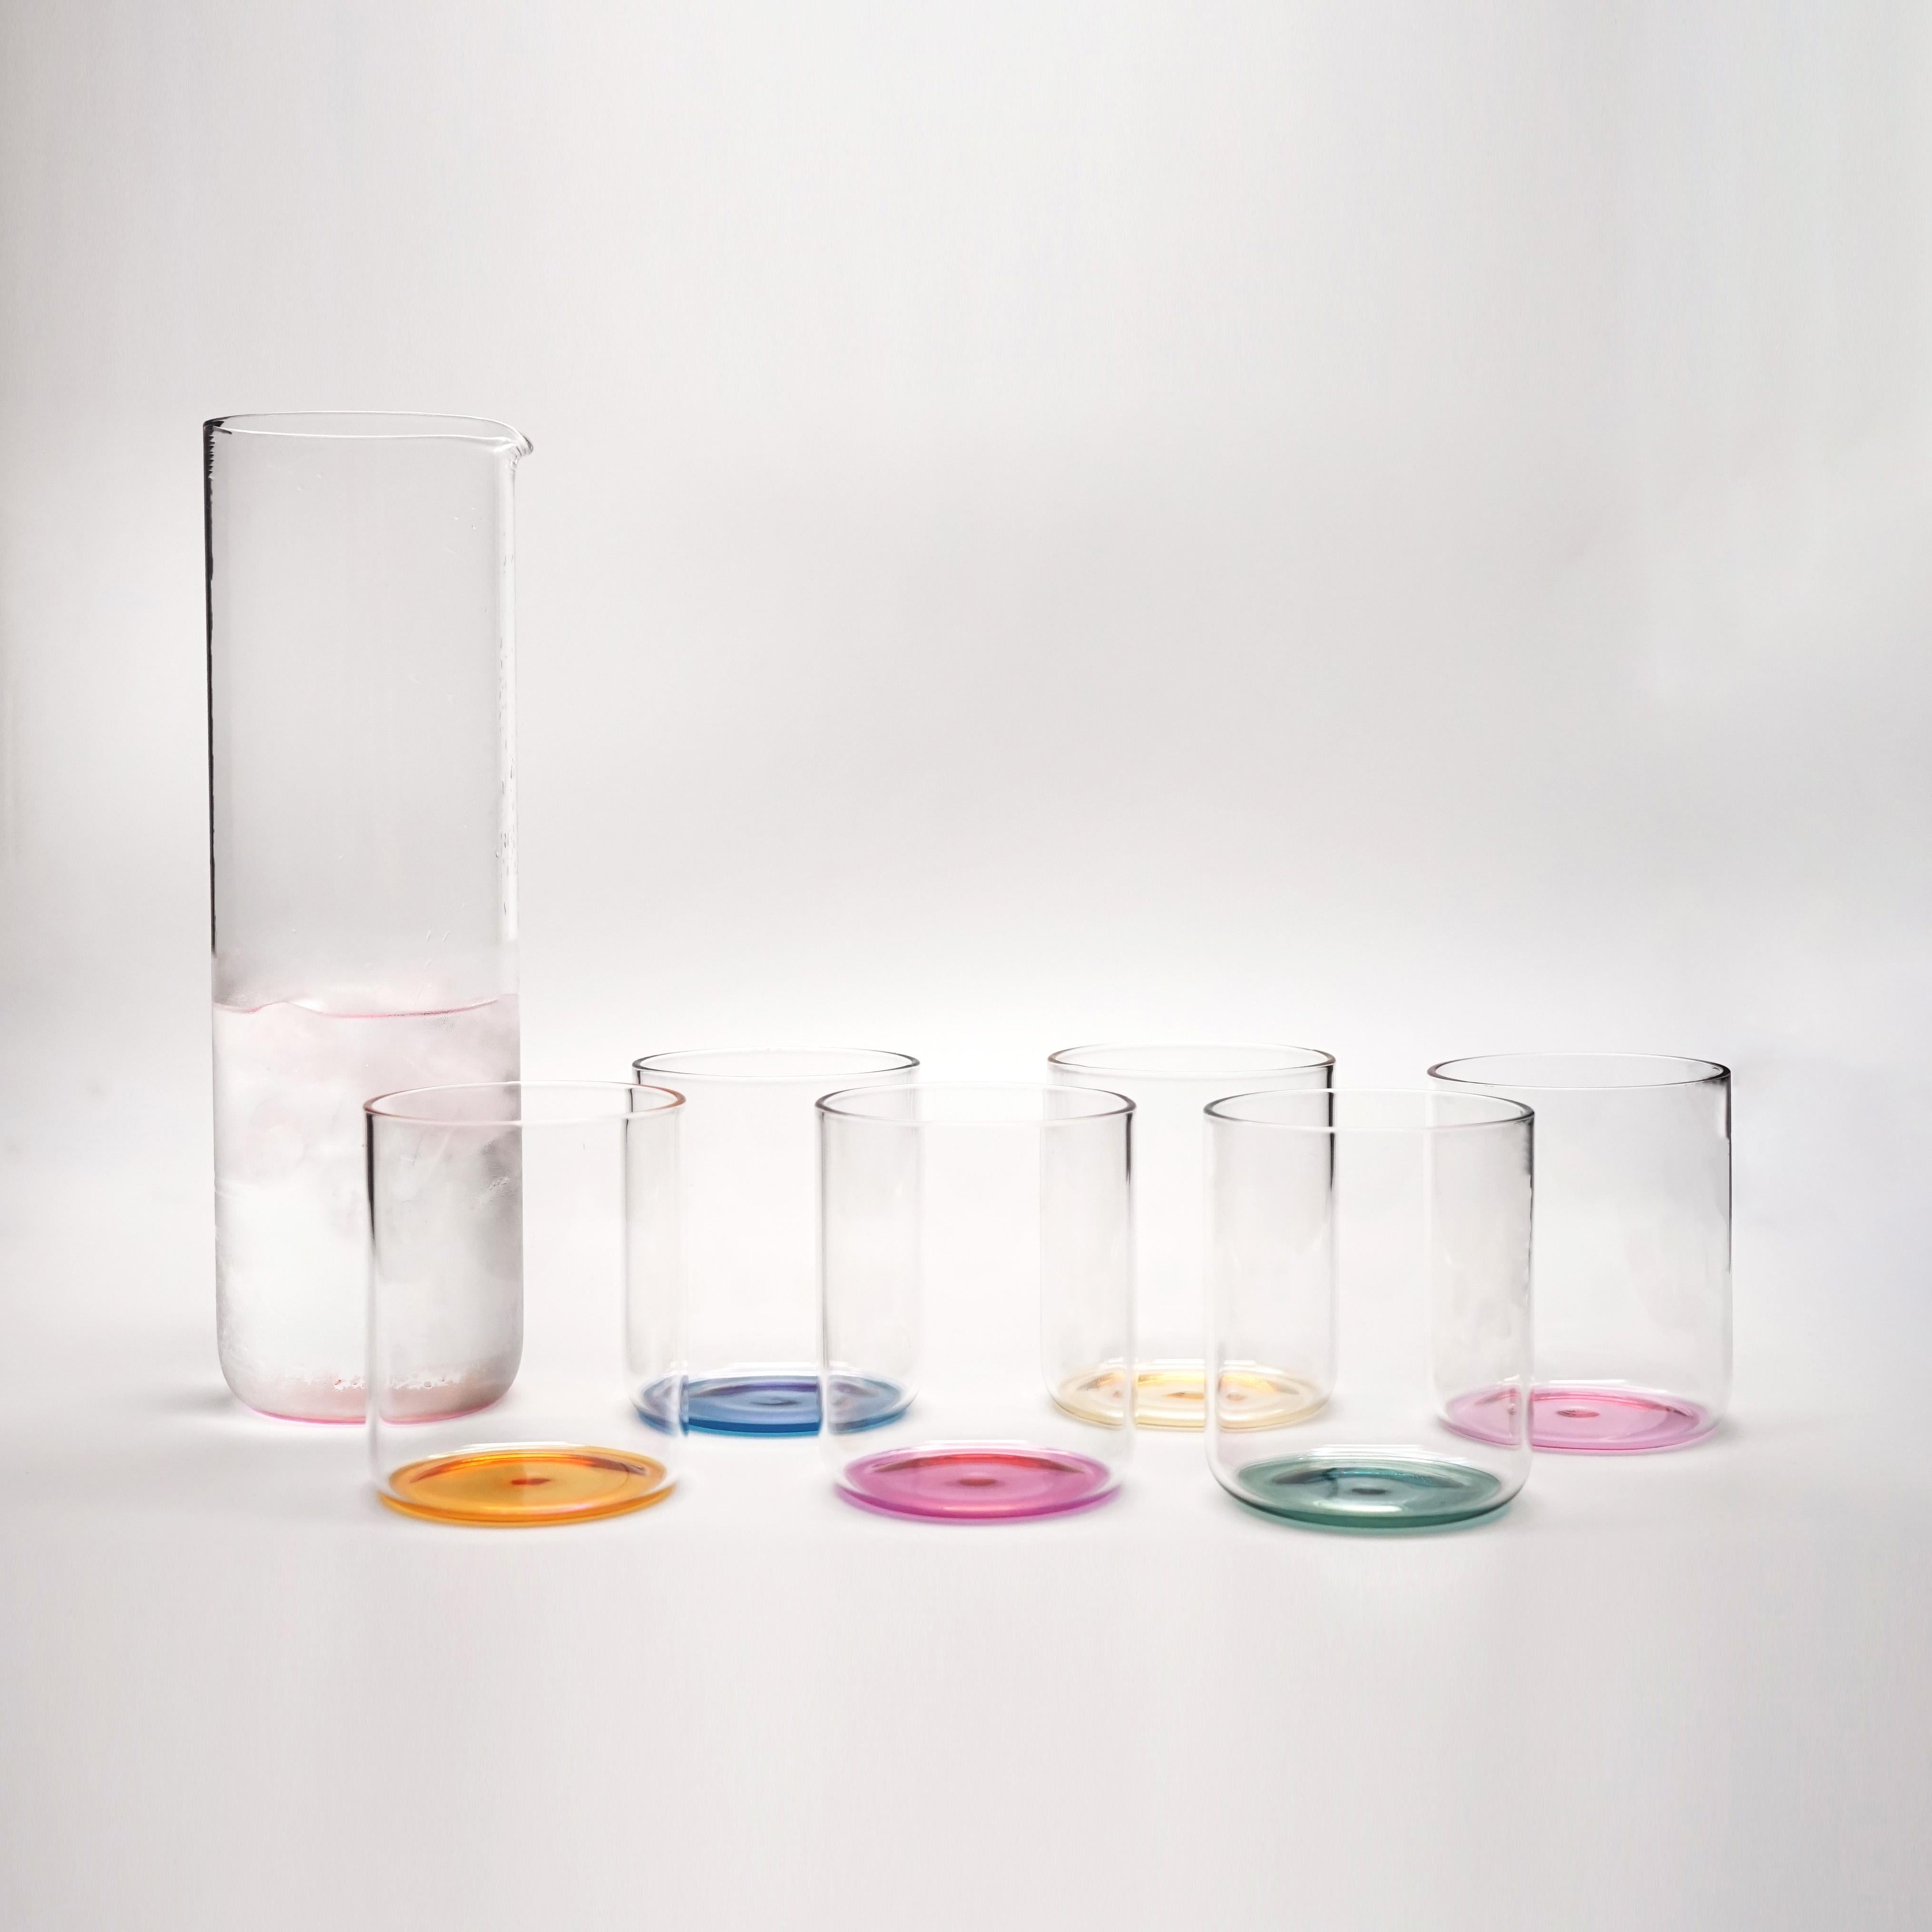 21st Century Set of 6 Colored Glass Iride, Hand-Crafted, Kanz Architetti  For Sale 3